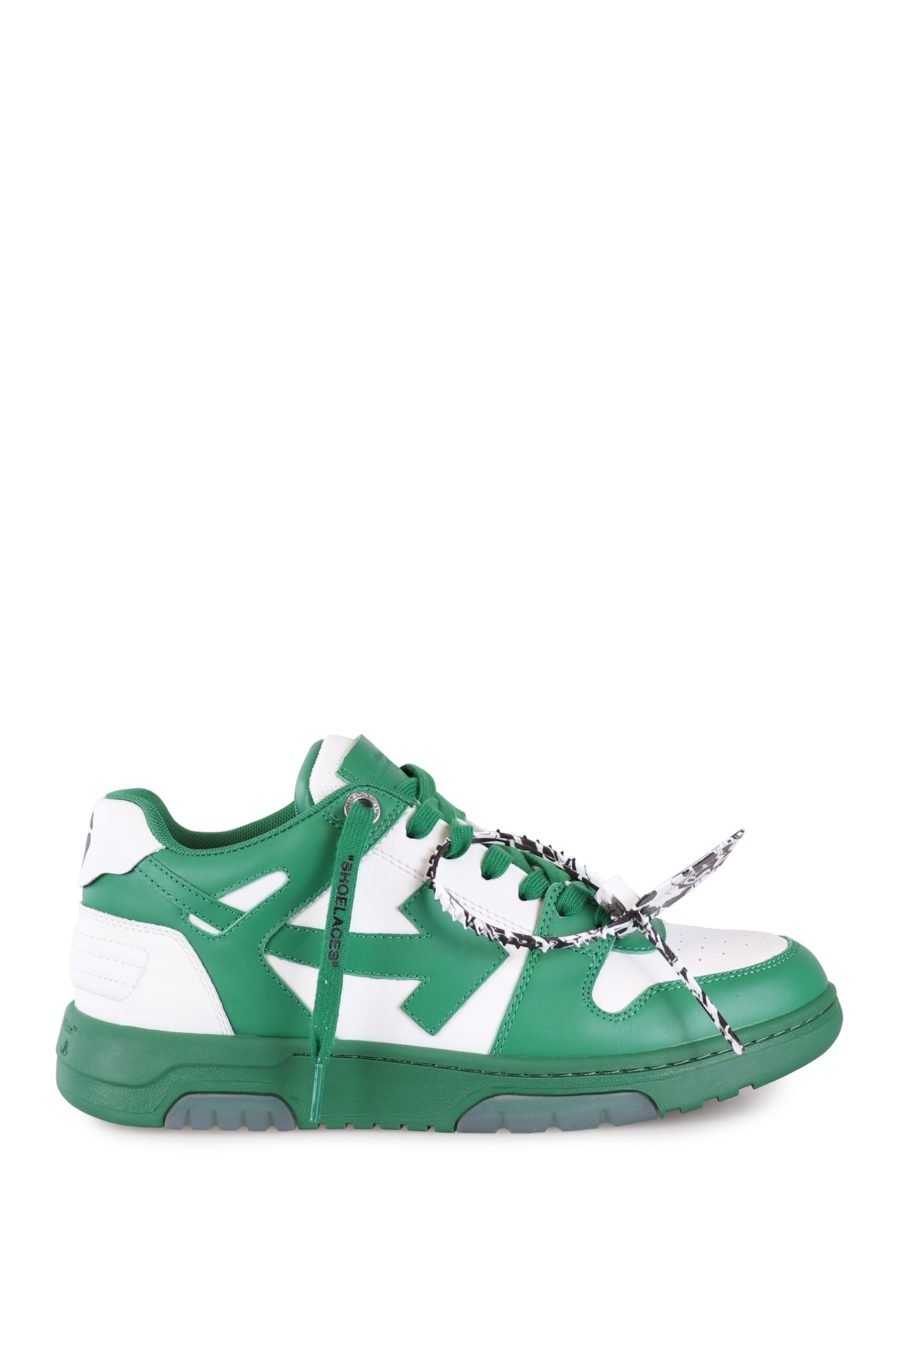 Zapatillas Off-White "out of office" blancos con verde - 13ee53f6c68a94f02cef89ab60e0228f0439bb08